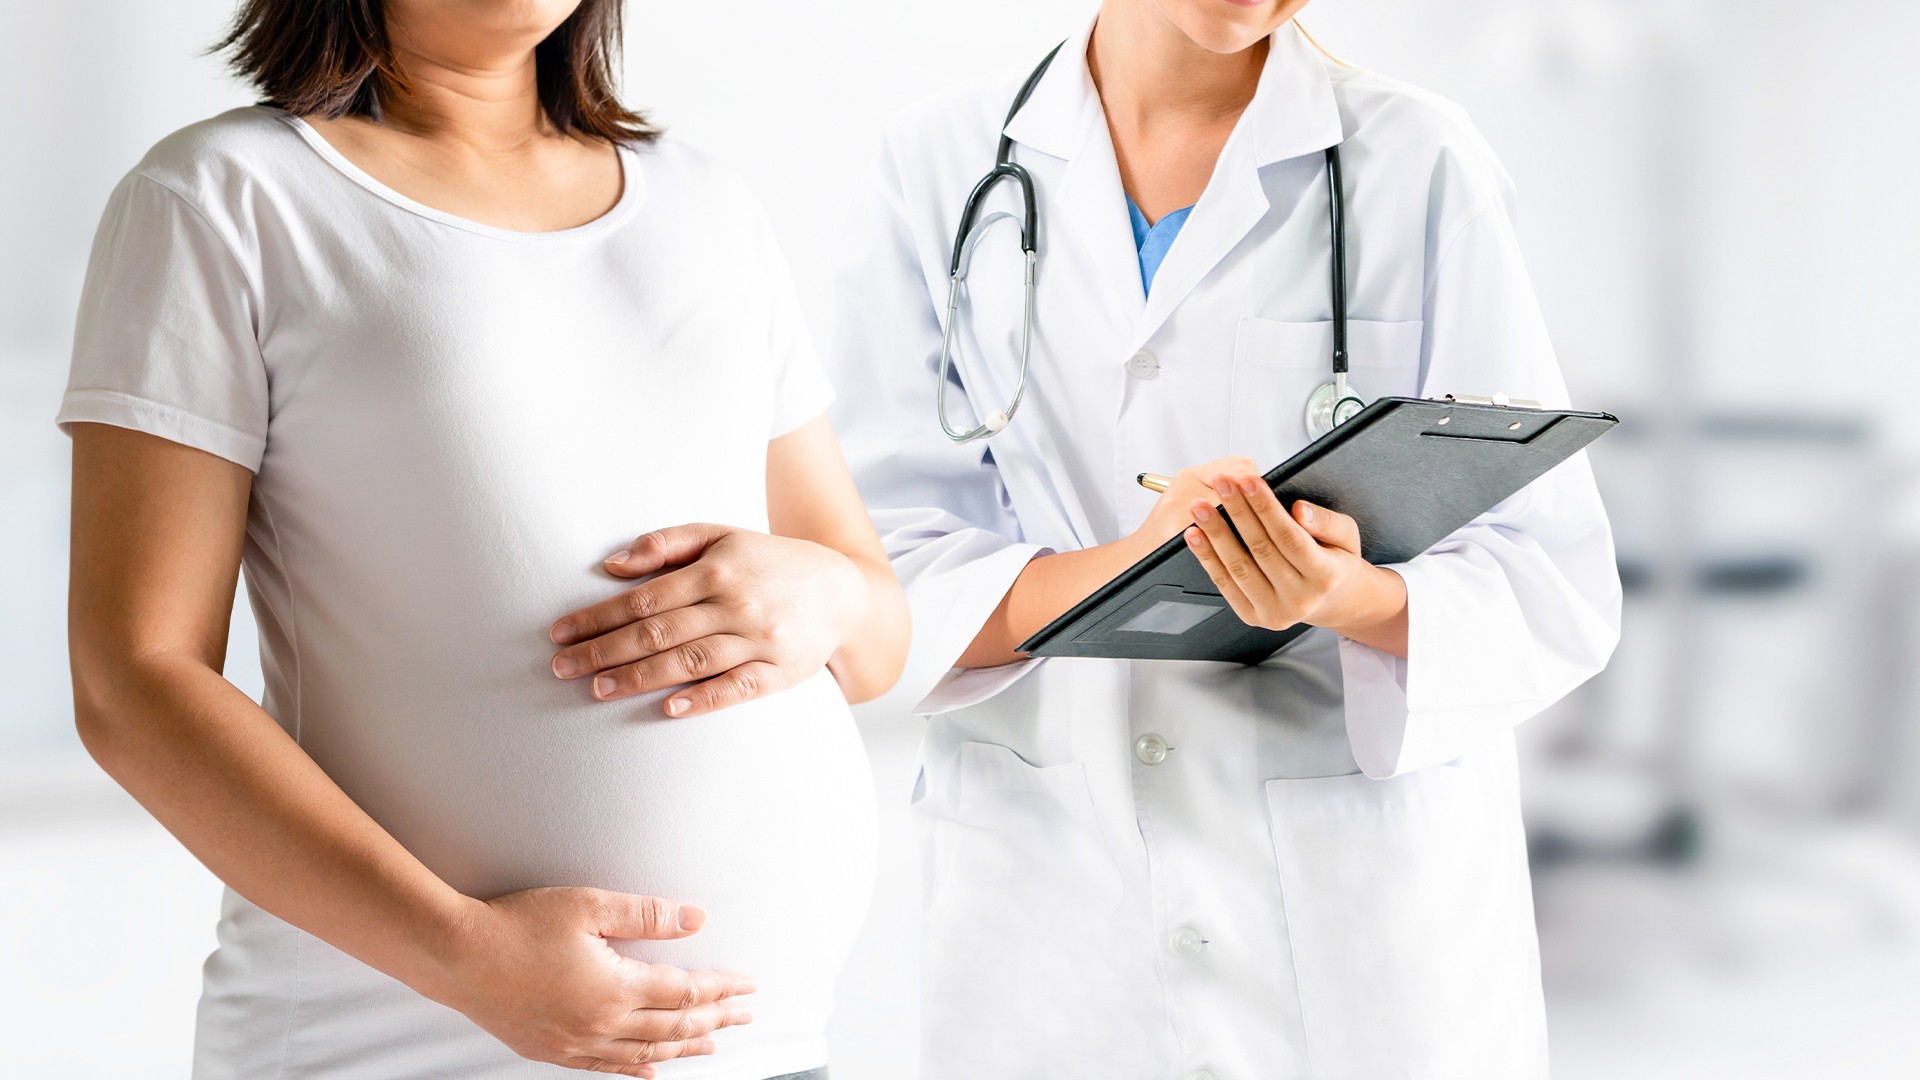 Nutritional needs during pregnancy